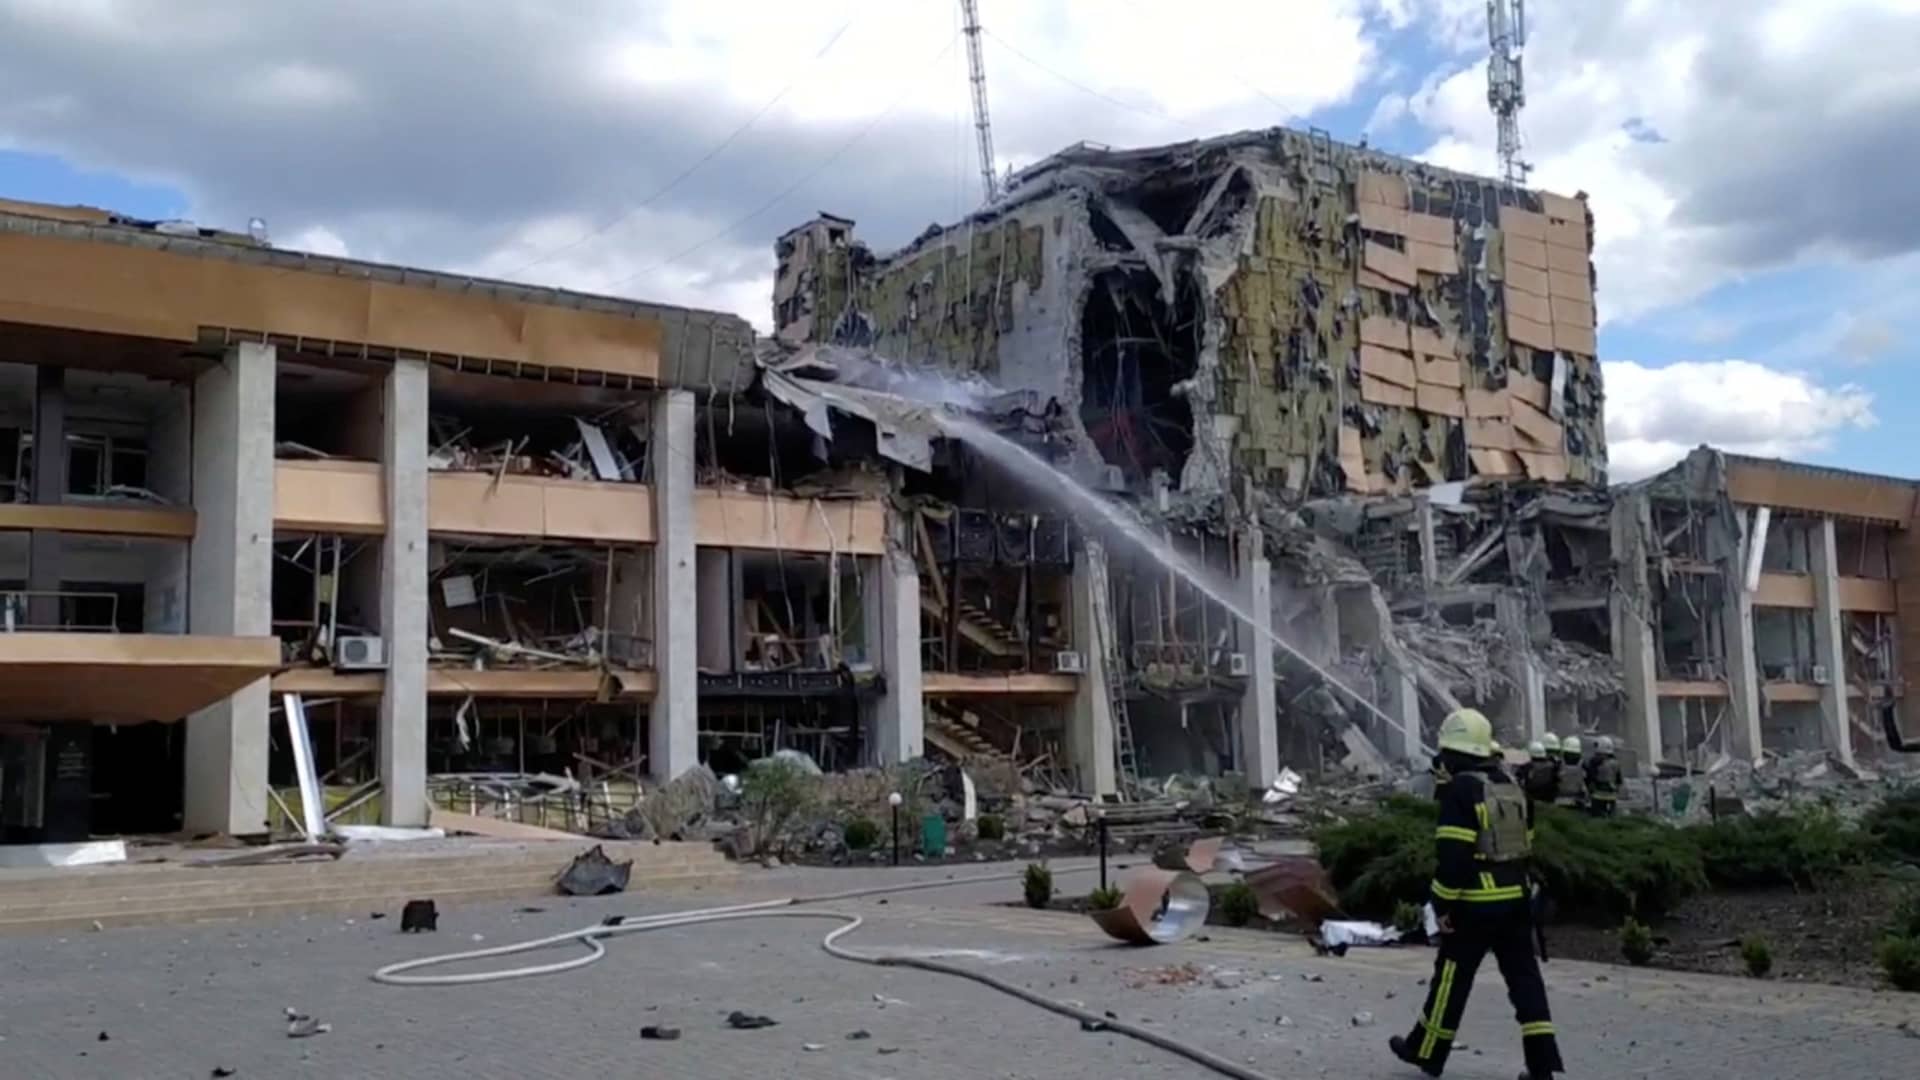 Firefighters work at the scene after an airstrike on the Cultural Centre, as Russia's attack on Ukraine continues, in Lozova, Kharkiv region, Ukraine in this still image taken from a handout video released May 20, 2022. 